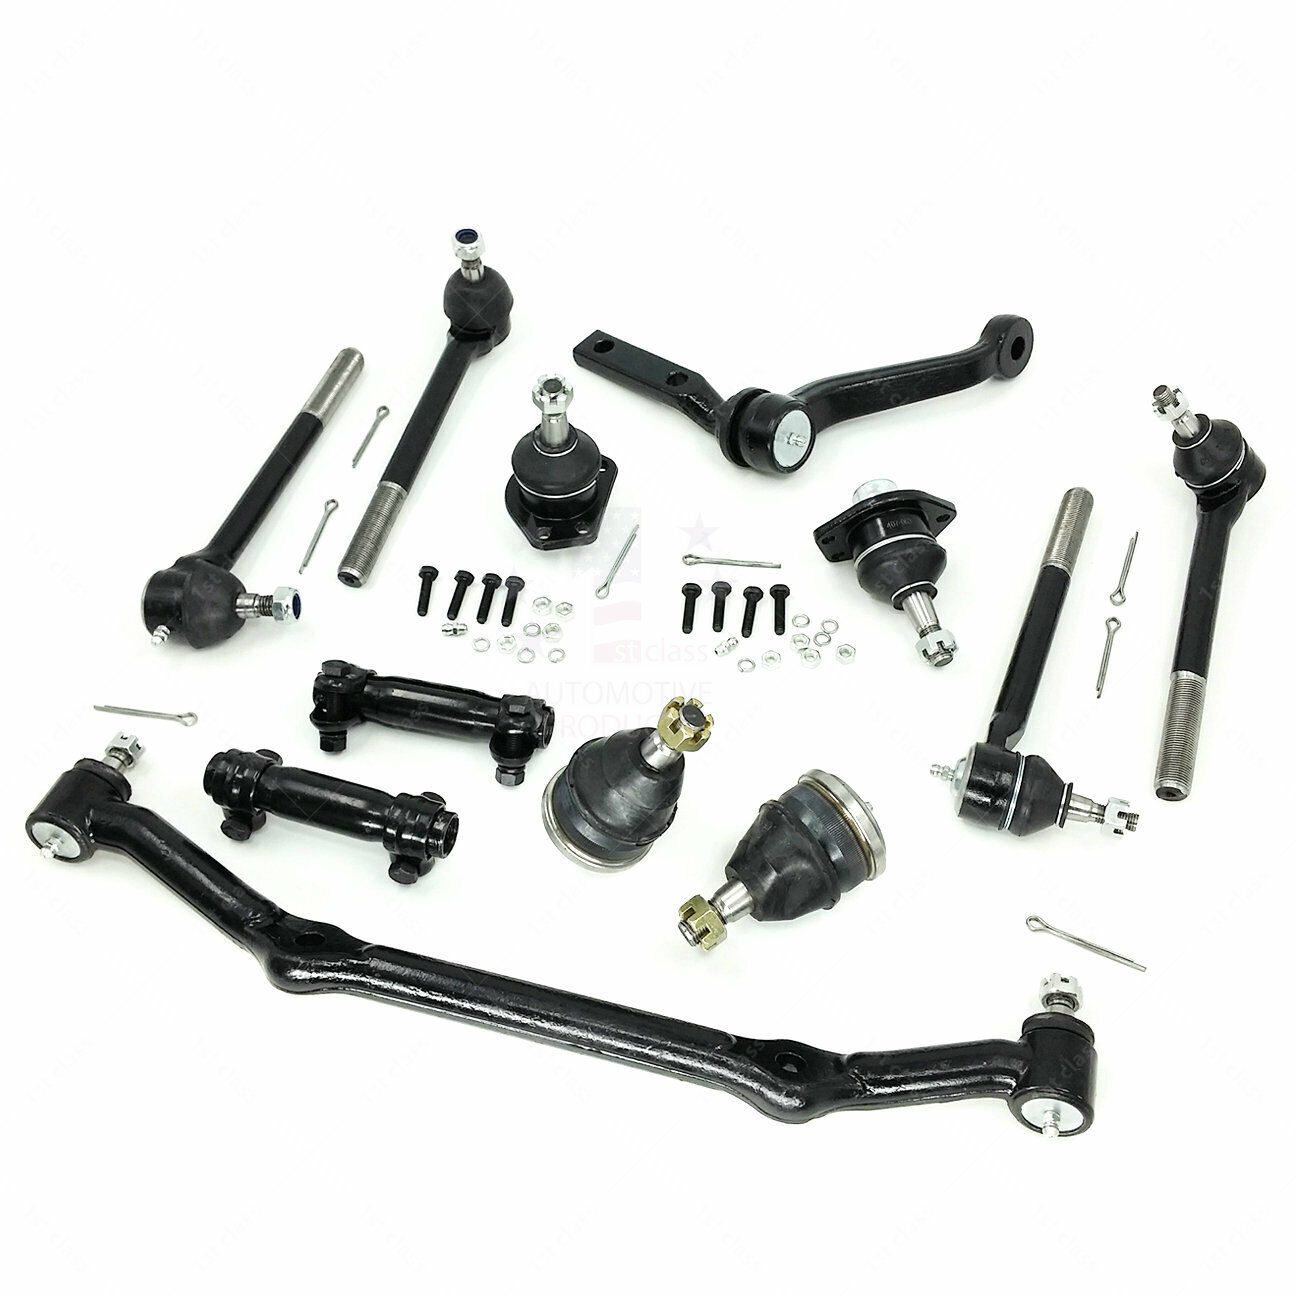 12PCS Steering & Suspension Kit For 1996-2005 Chevy GMC Sonoma Jimmy 2WD